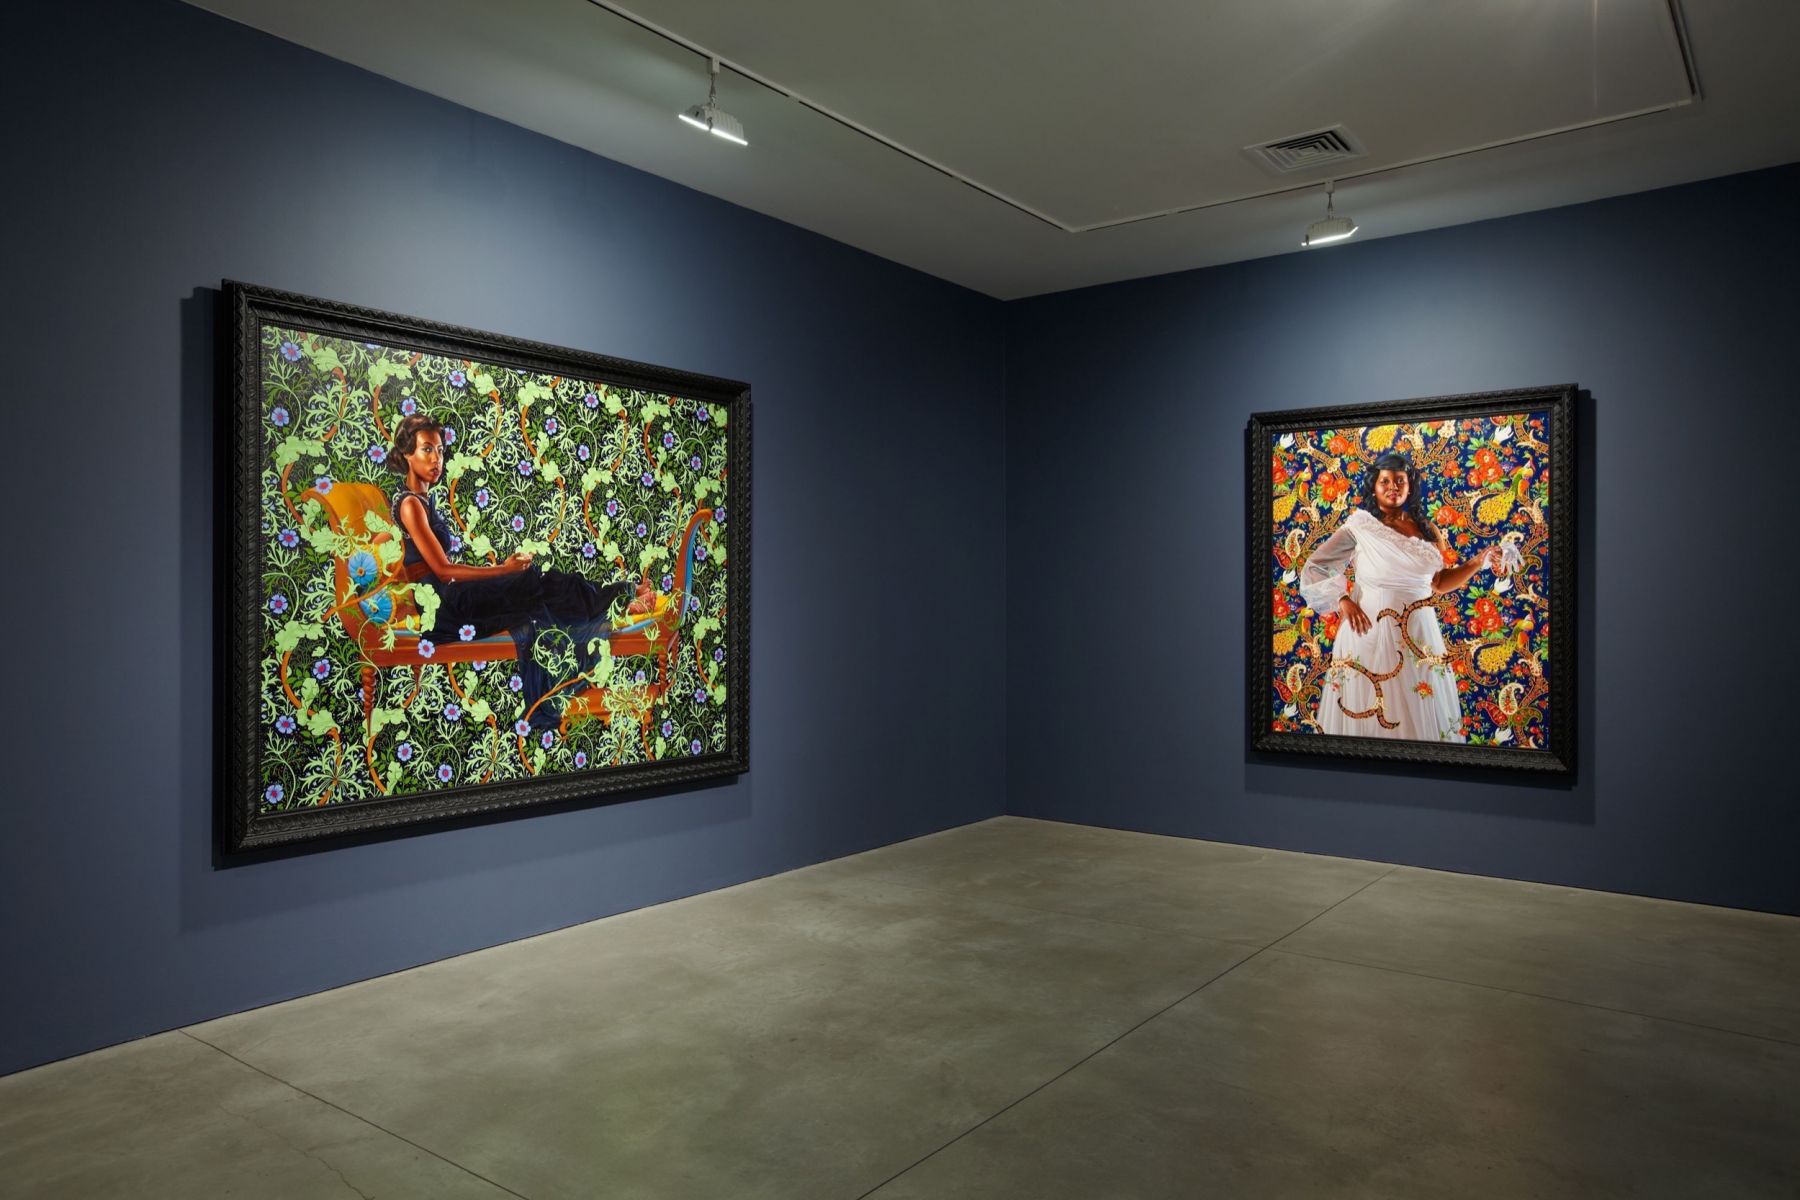 Kehinde Wiley | An Economy of Grace, Sean Kelly Gallery, New York City, USA, May 6 - June 16, 2012 | 5